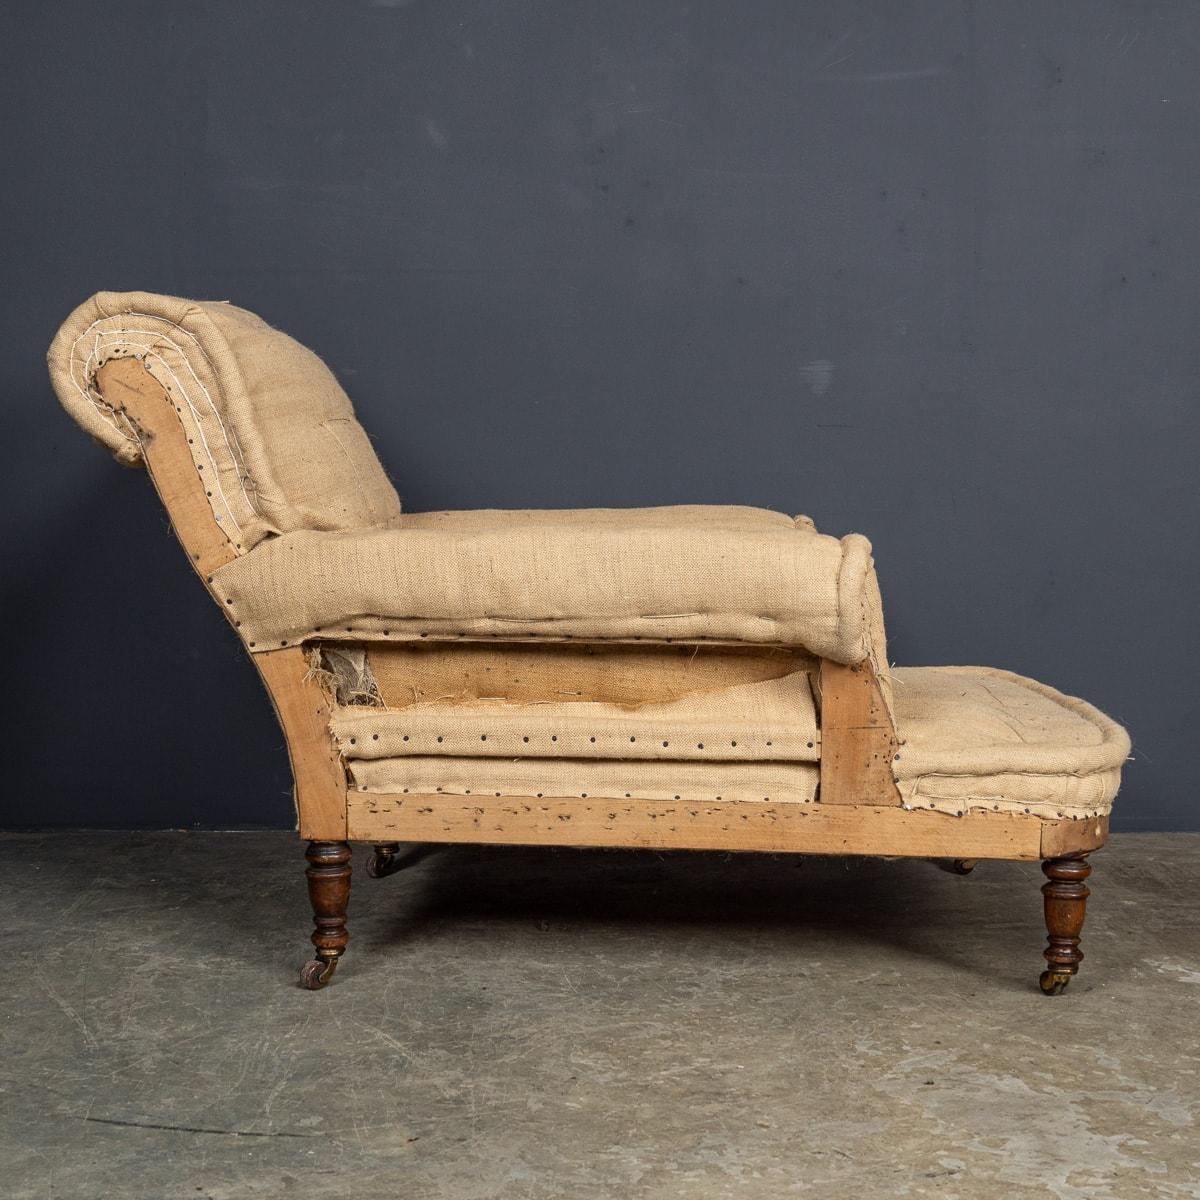 Fabric Antique 19th Century Victorian Chaise Longue c.1870 For Sale